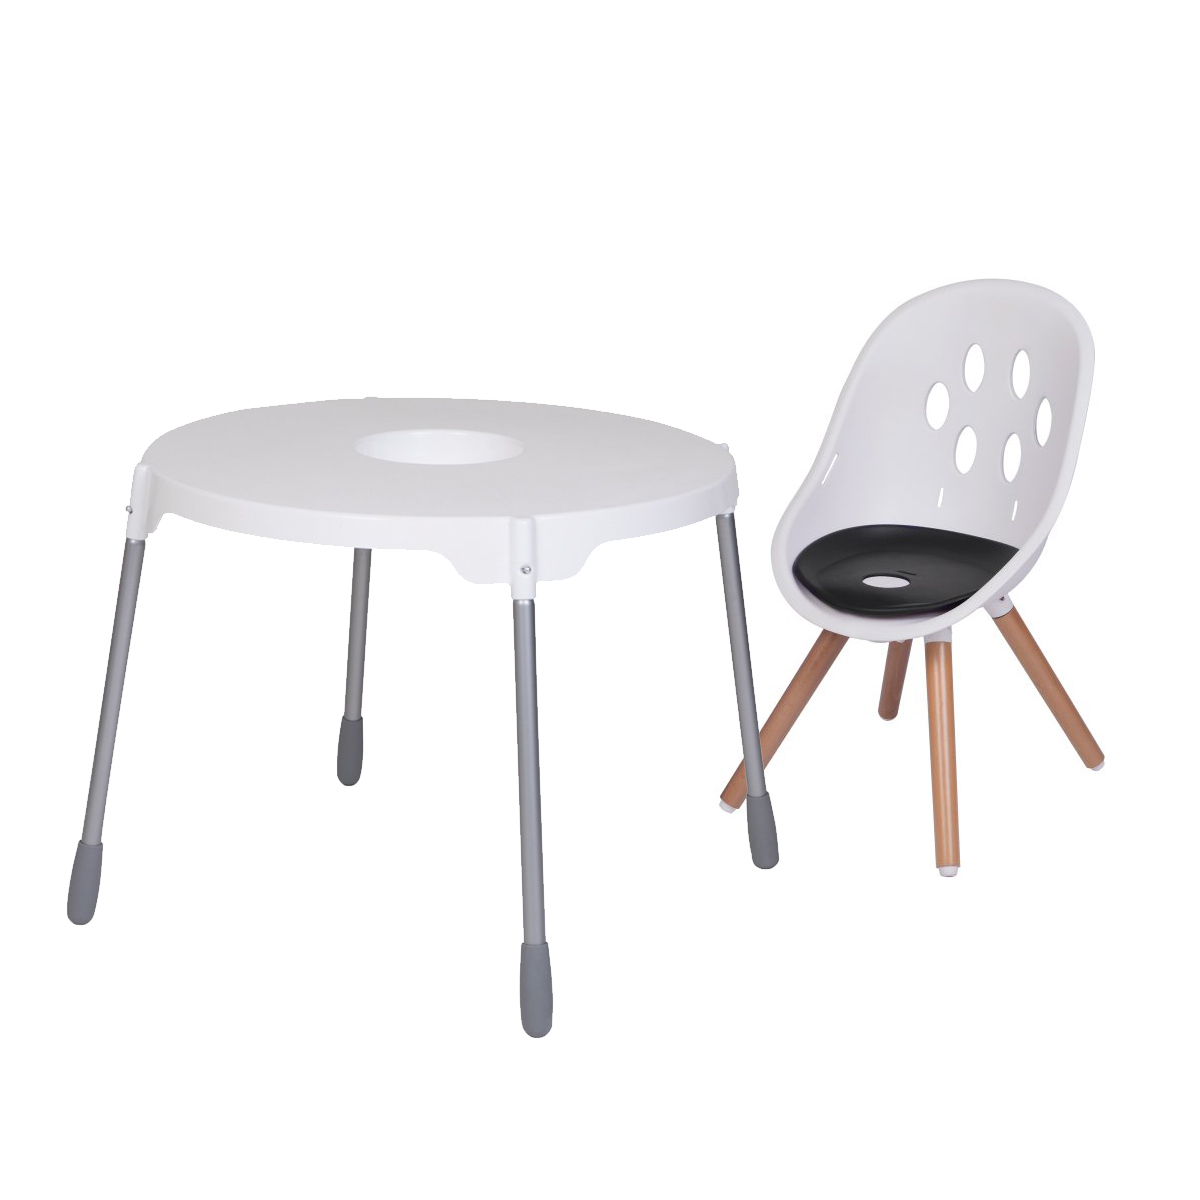 https://cdn.accentuate.io/7873484947626/19793939267754/phil_and_teds_poppy_wood_leg_high_chair_to_my_chair_dual_modes_1_combo-v1698265626882.jpg?1200x1200